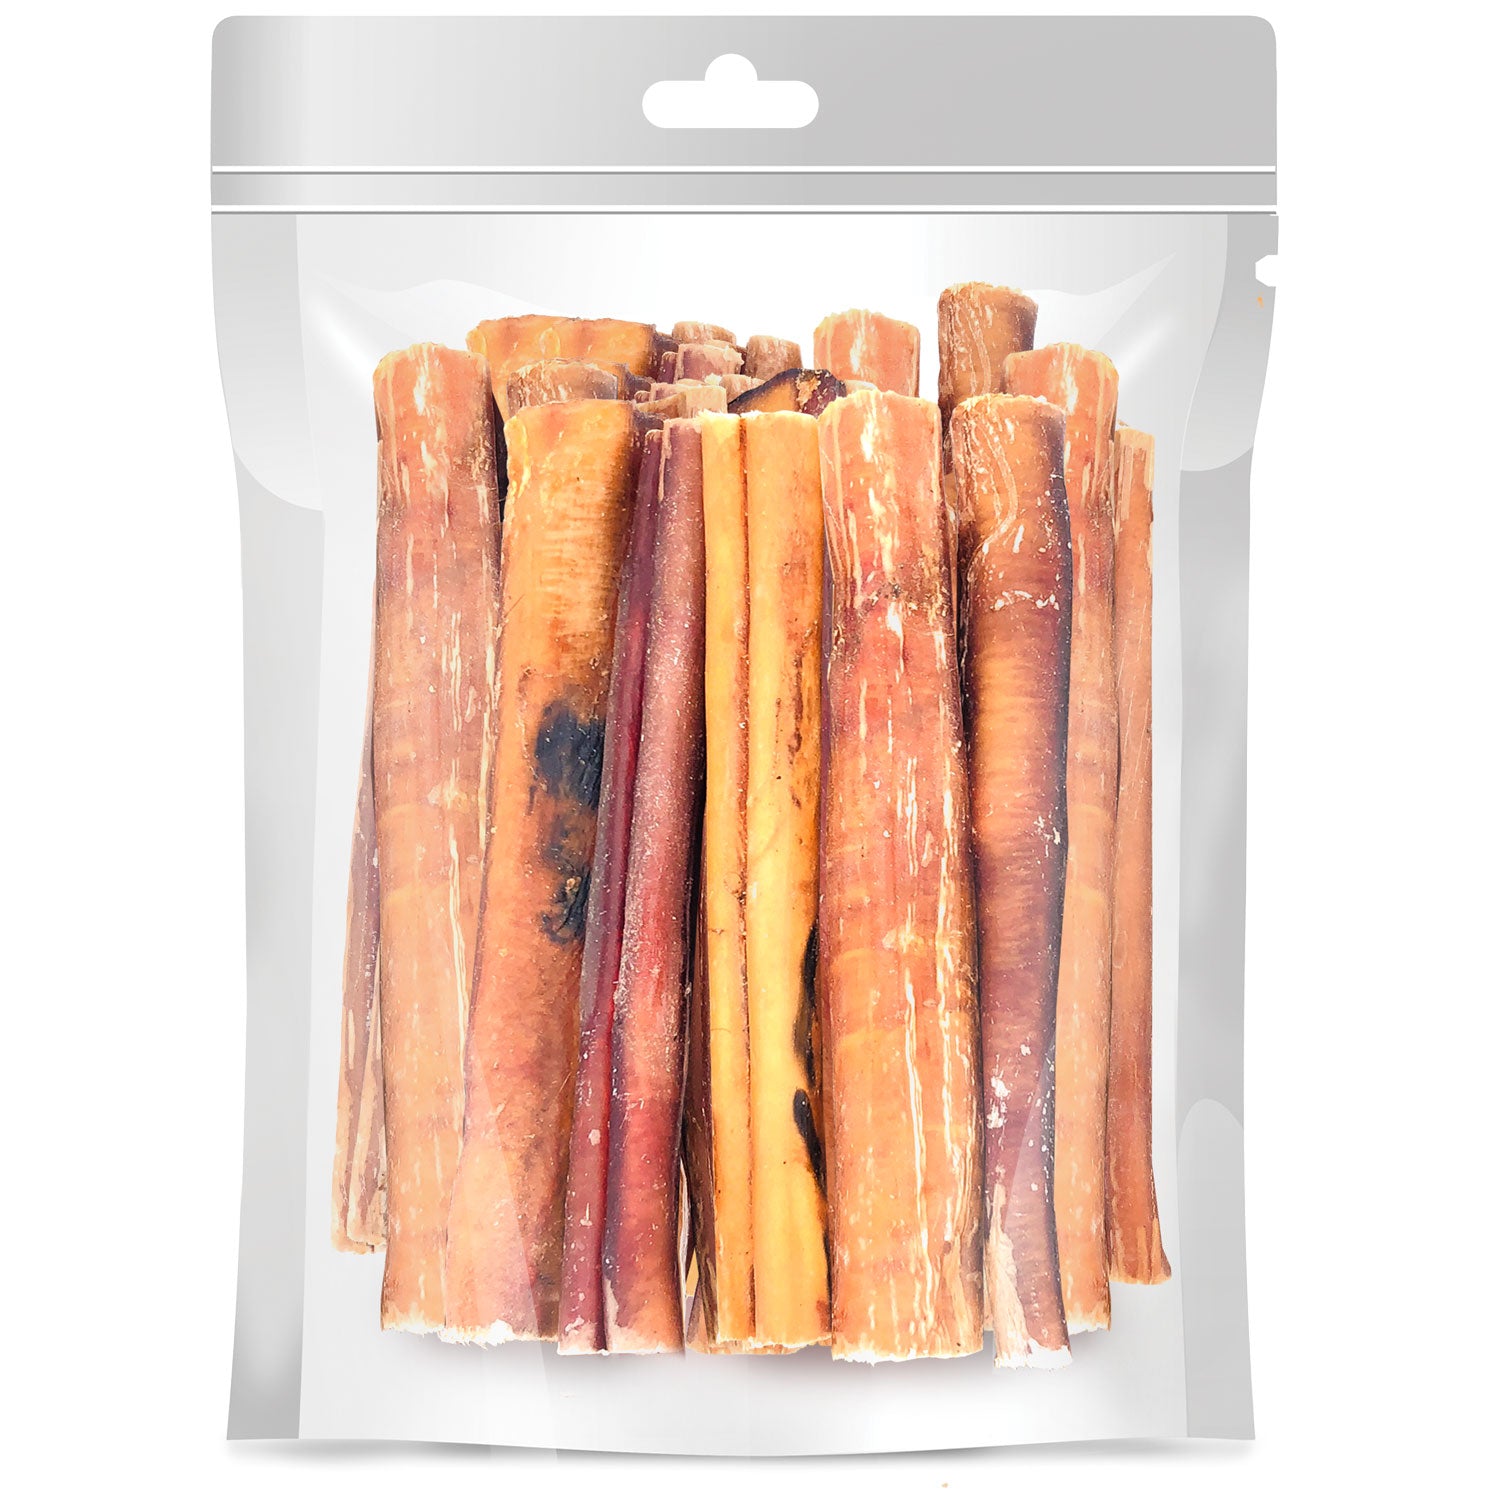 ValueBull Bully Sticks for Dogs, Thick 6 Inch, 400 Count RESALE PACKS (20 x 20 Count)